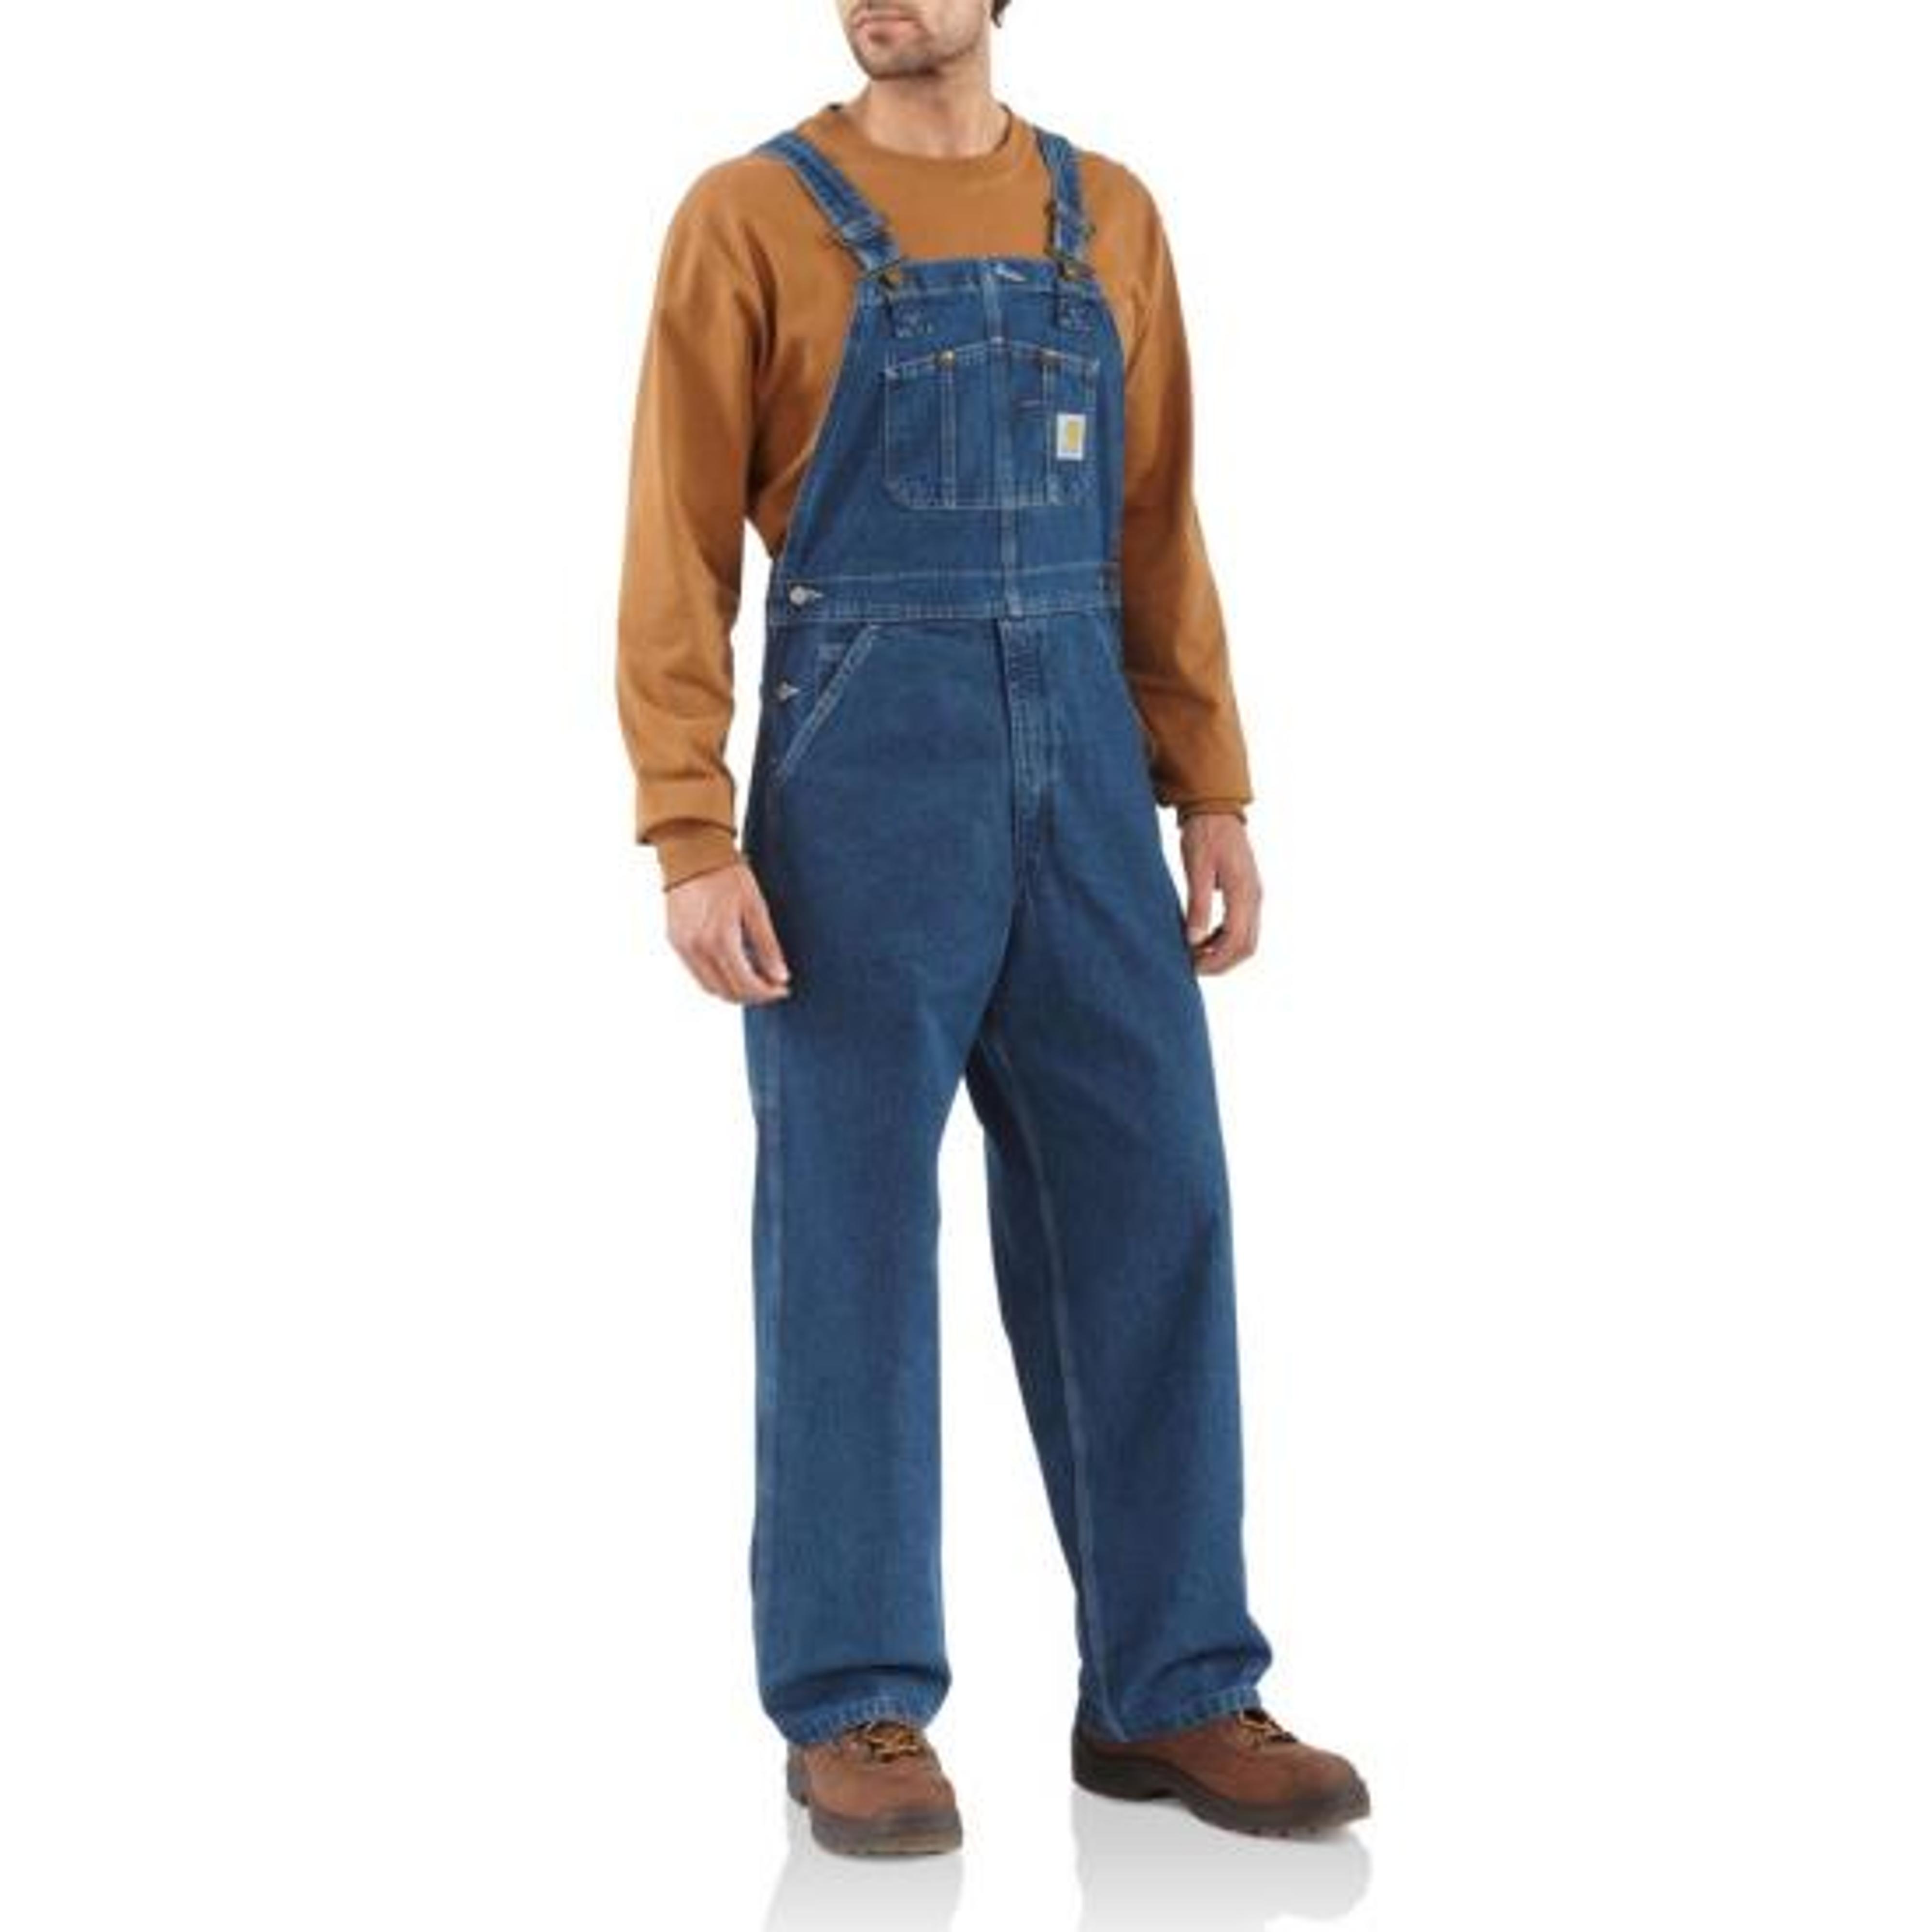  Washed Denim Overall